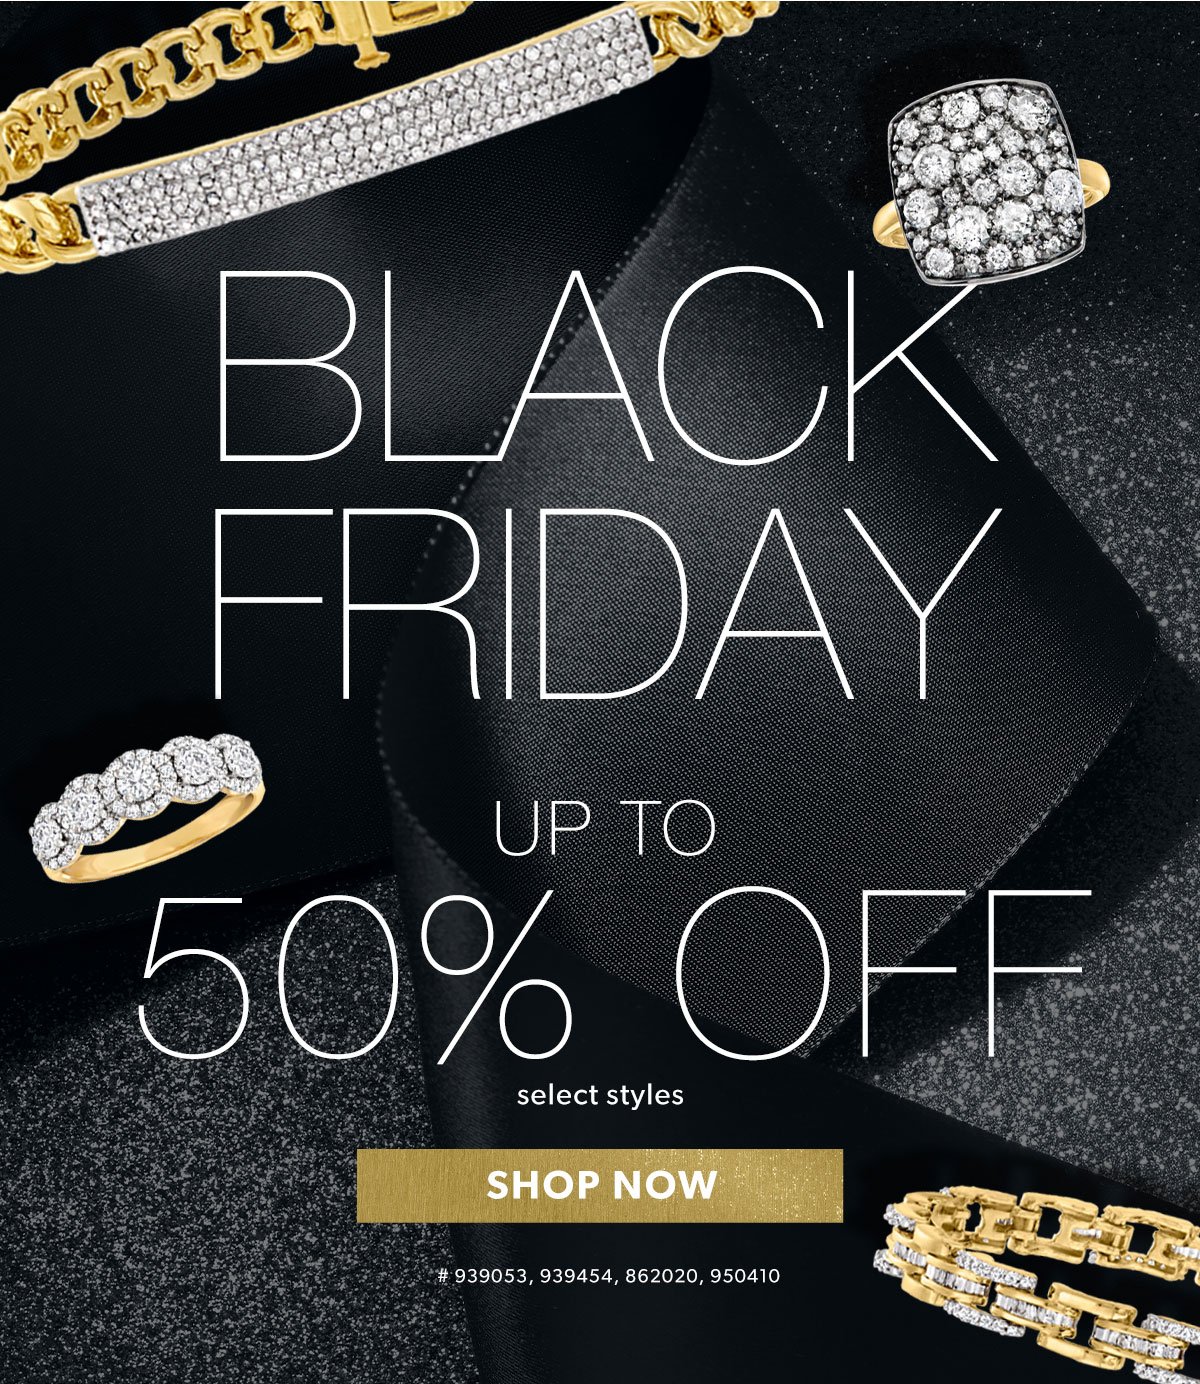 Black Friday Up To 50% Off Select Styles. Shop Now